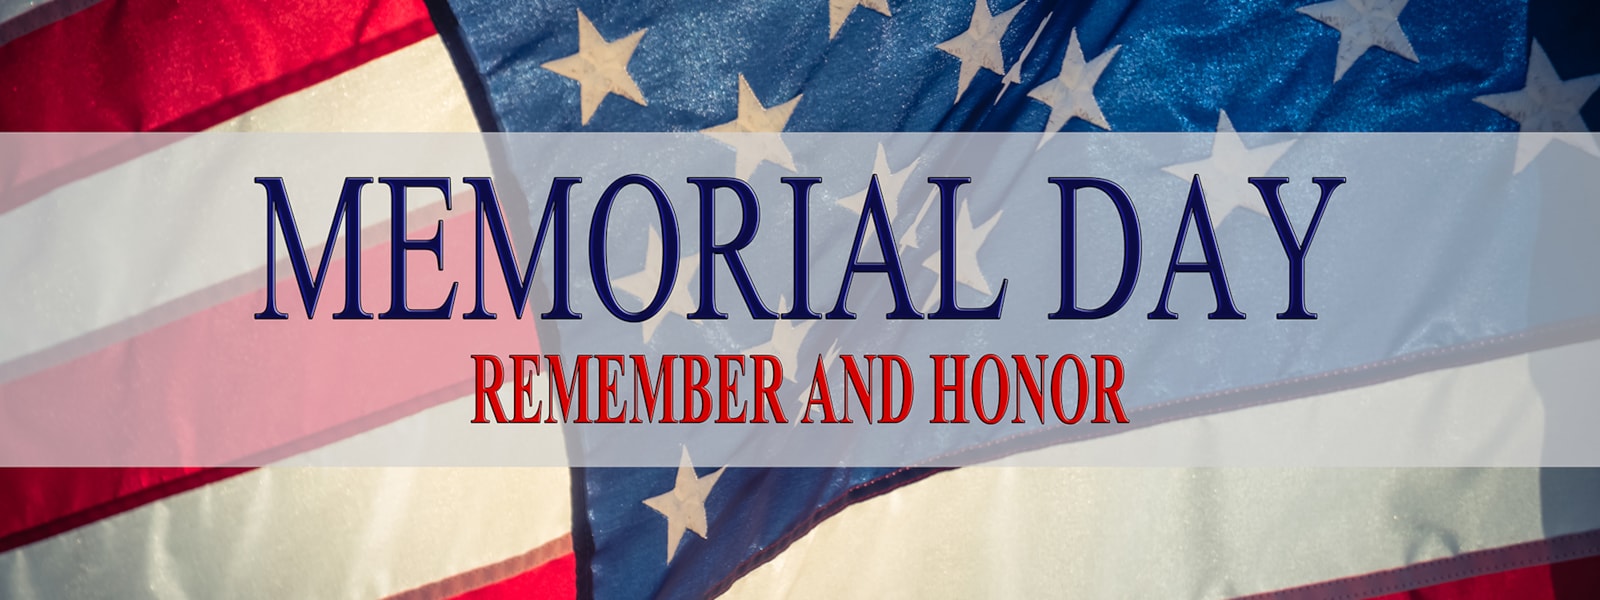 Memorial Day - Remember and Honor on American Flag